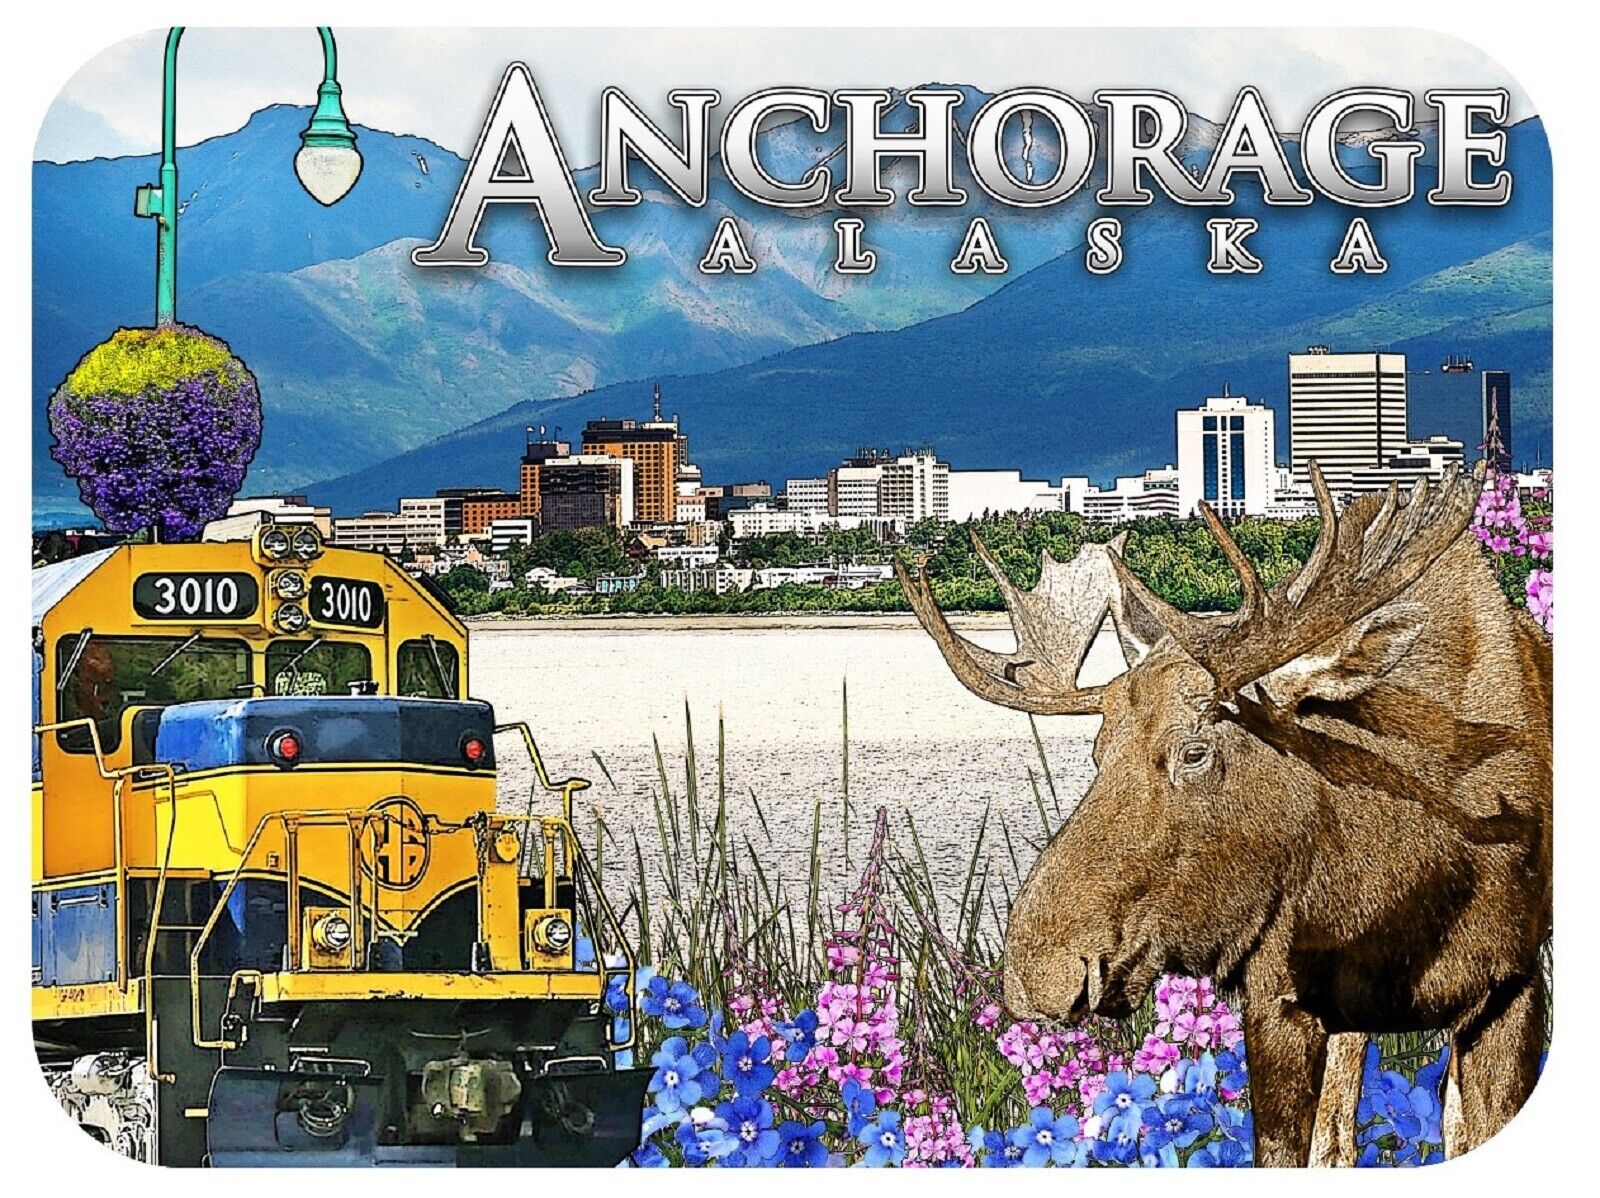 Anchorage Alaska with Moose and Train Cityscape Fridge Magnet